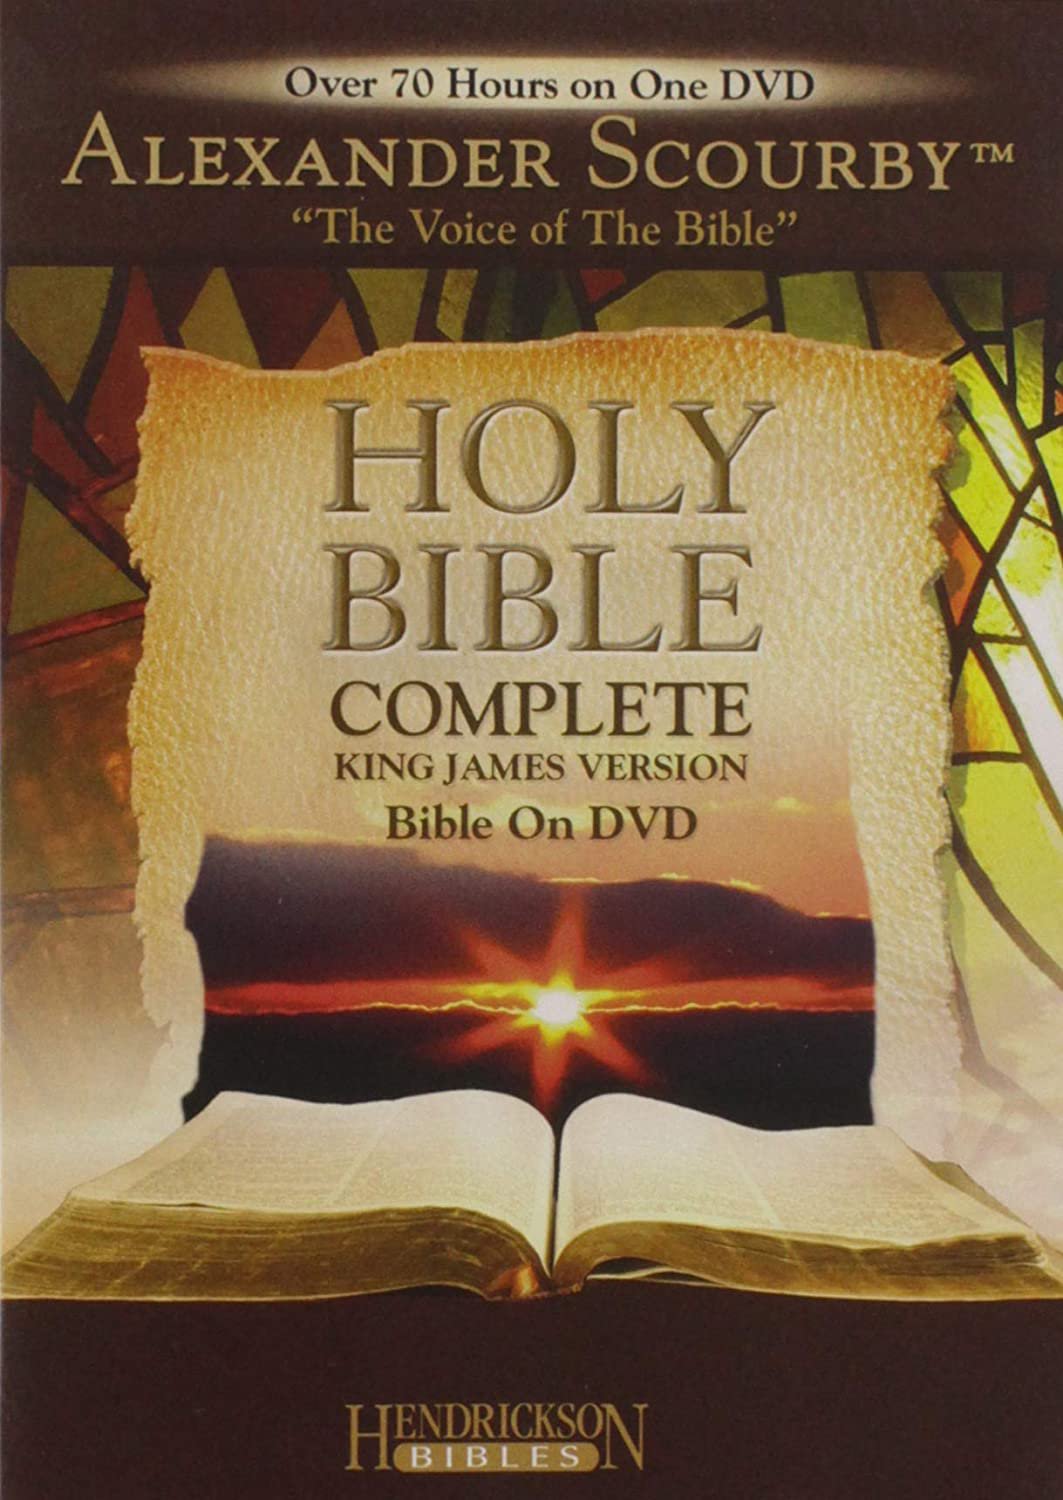 Holy Bible: Complete King James Version Bible on DVD narrated by Alexander Scourby - SEALED!